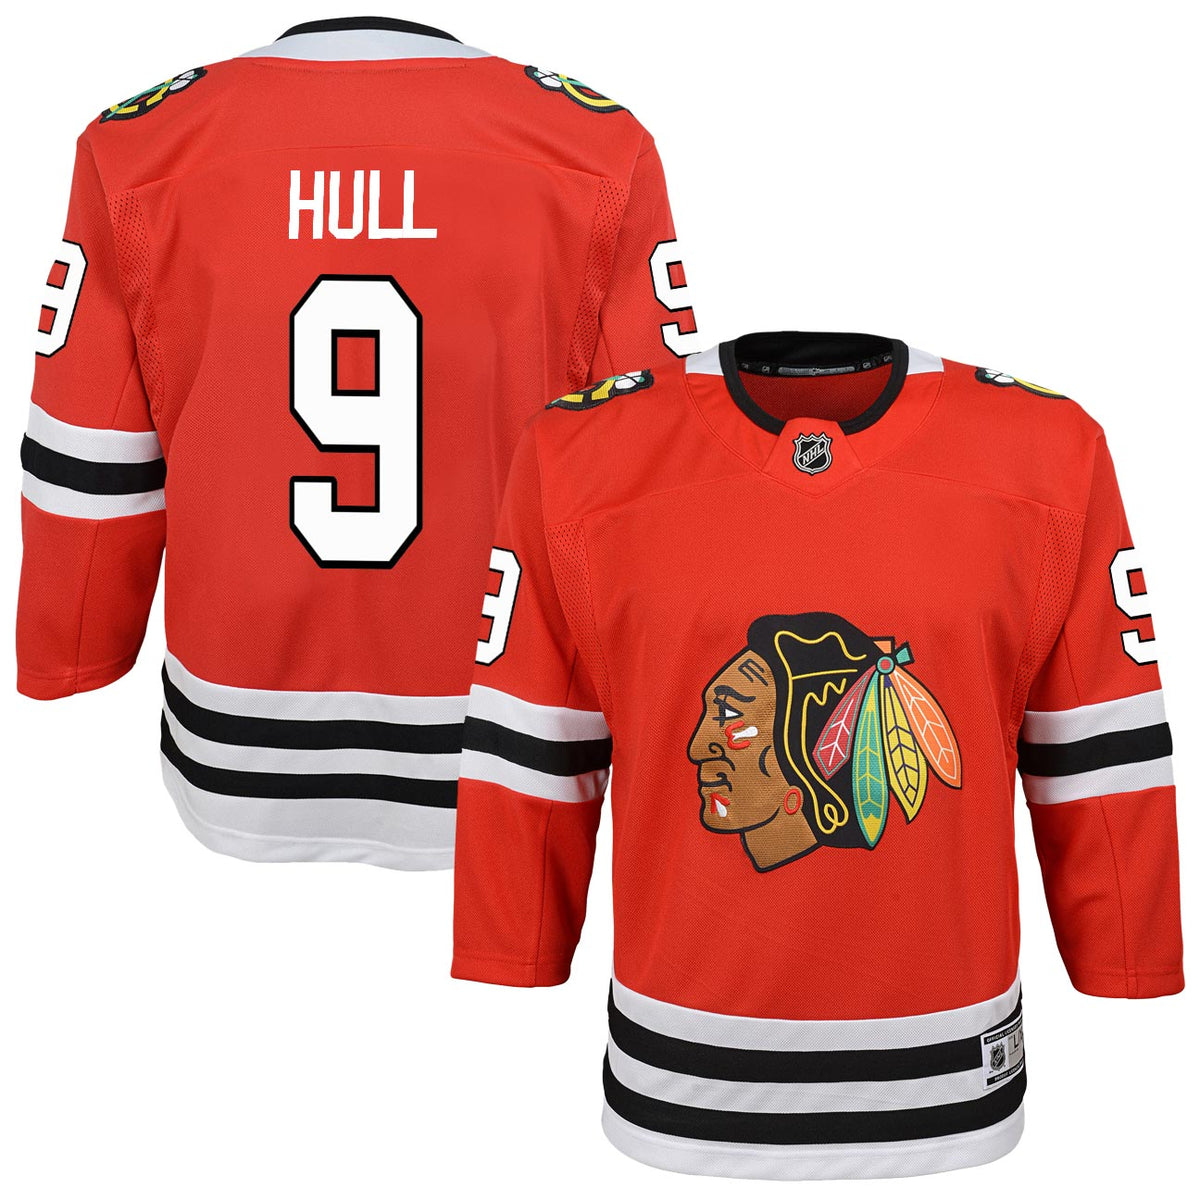 bobby hull jersey products for sale